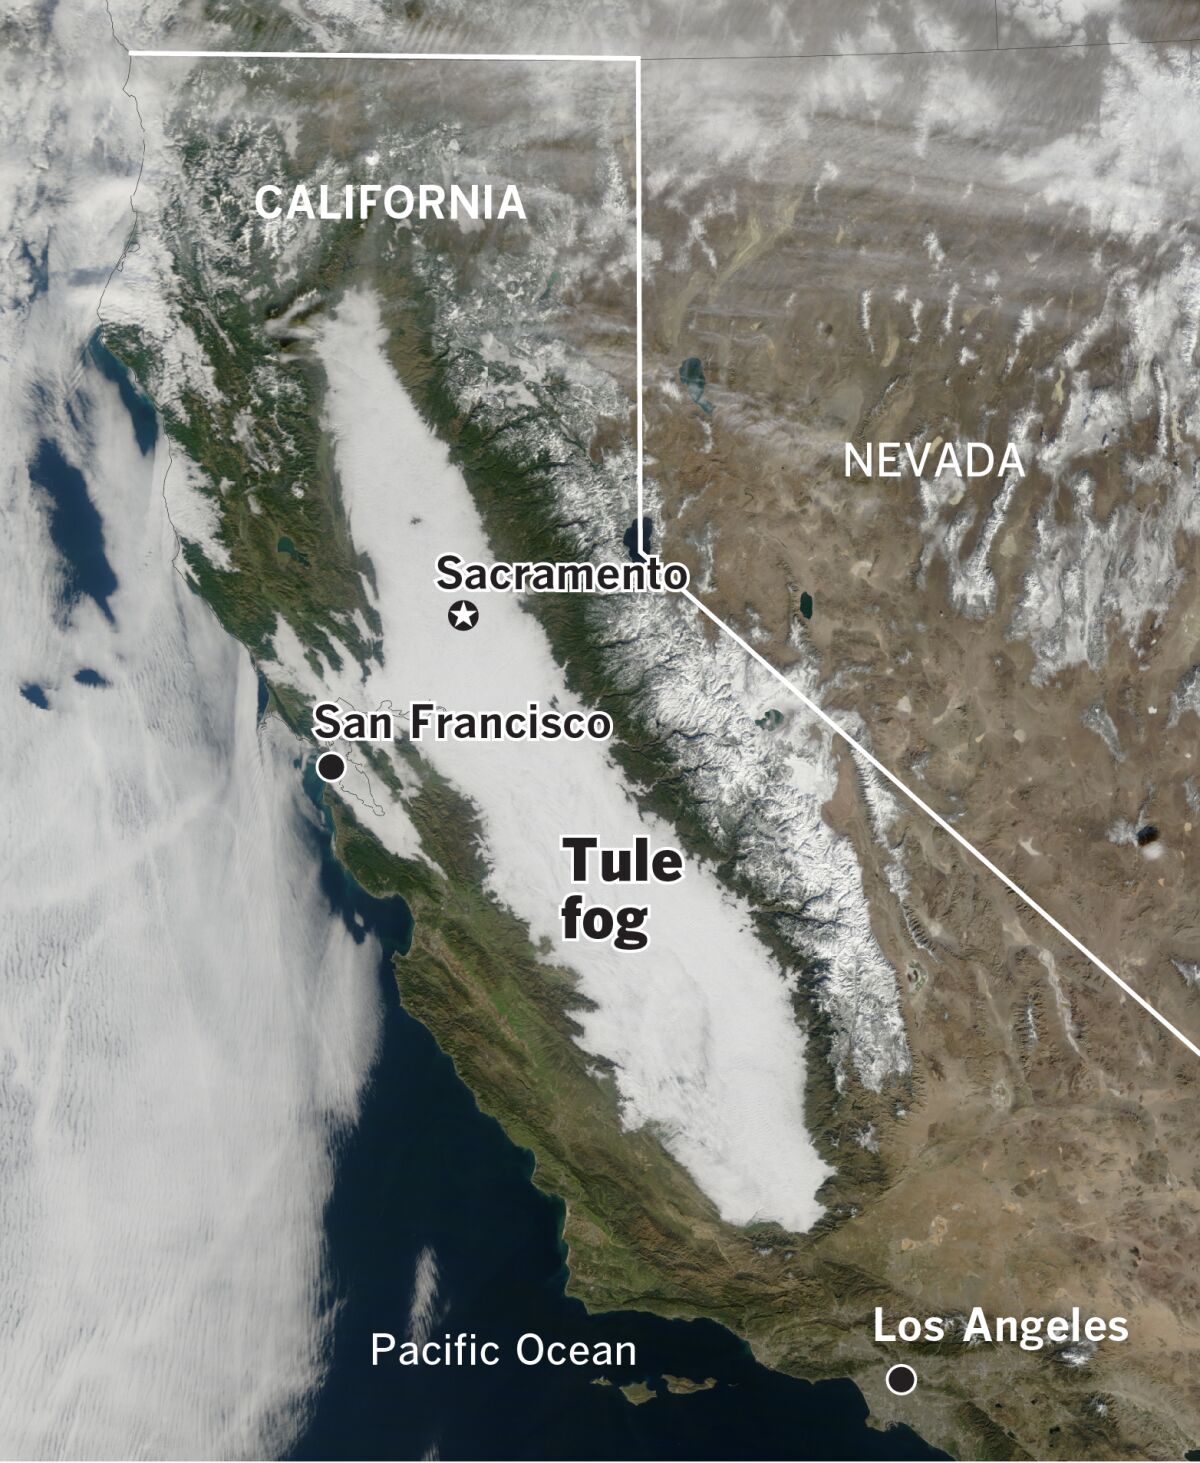 A satellite photo shows California's Central Valley socked in with thick, white tule fog.